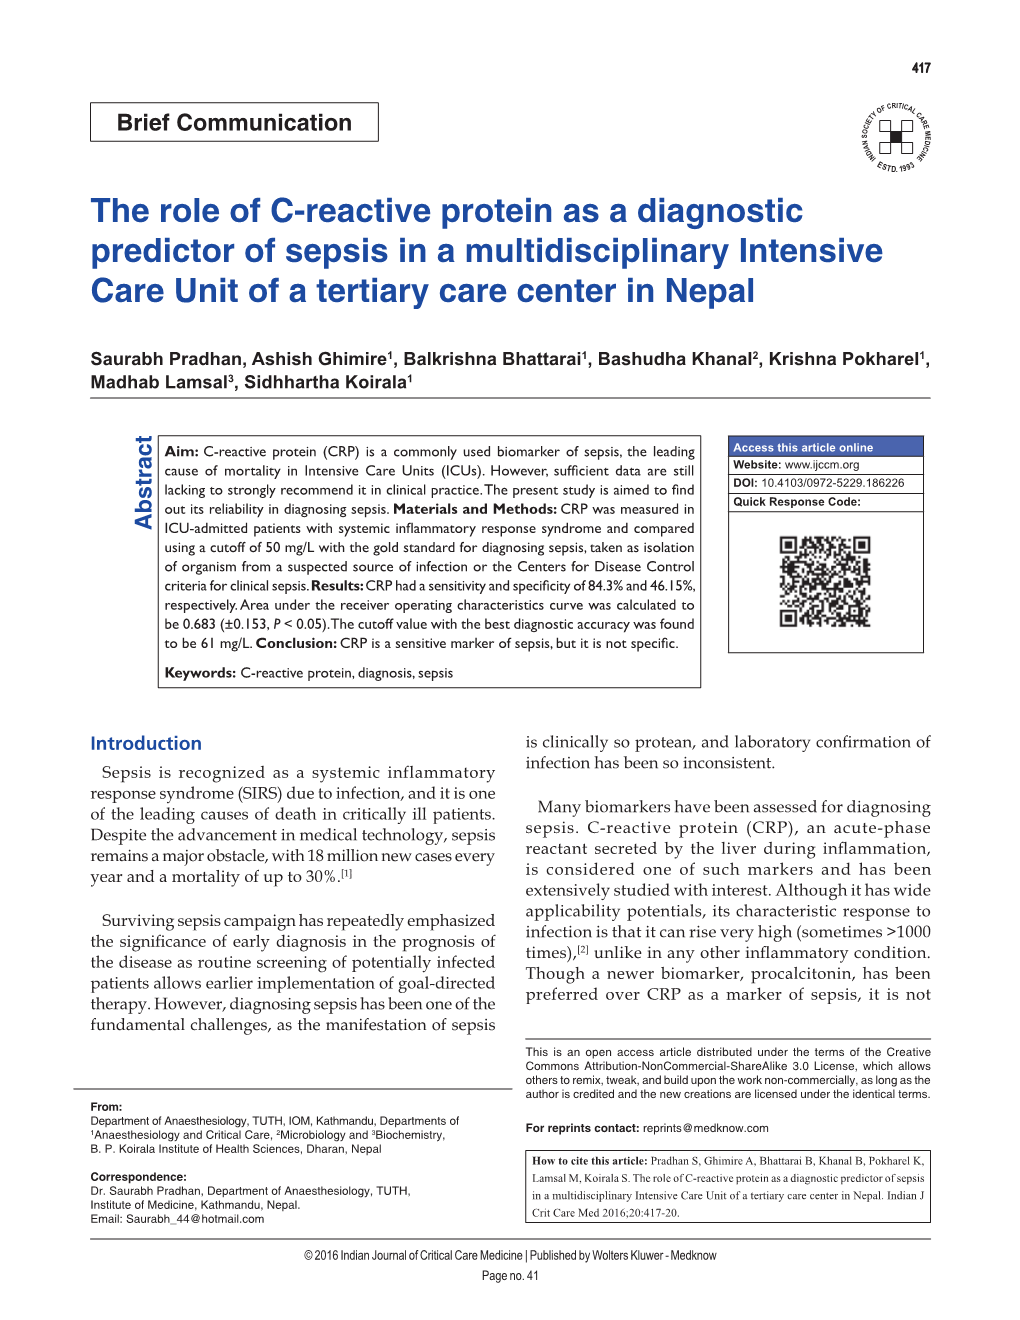 The Role of C‑Reactive Protein As a Diagnostic Predictor of Sepsis in a Multidisciplinary Intensive Care Unit of a Tertiary Care Center in Nepal